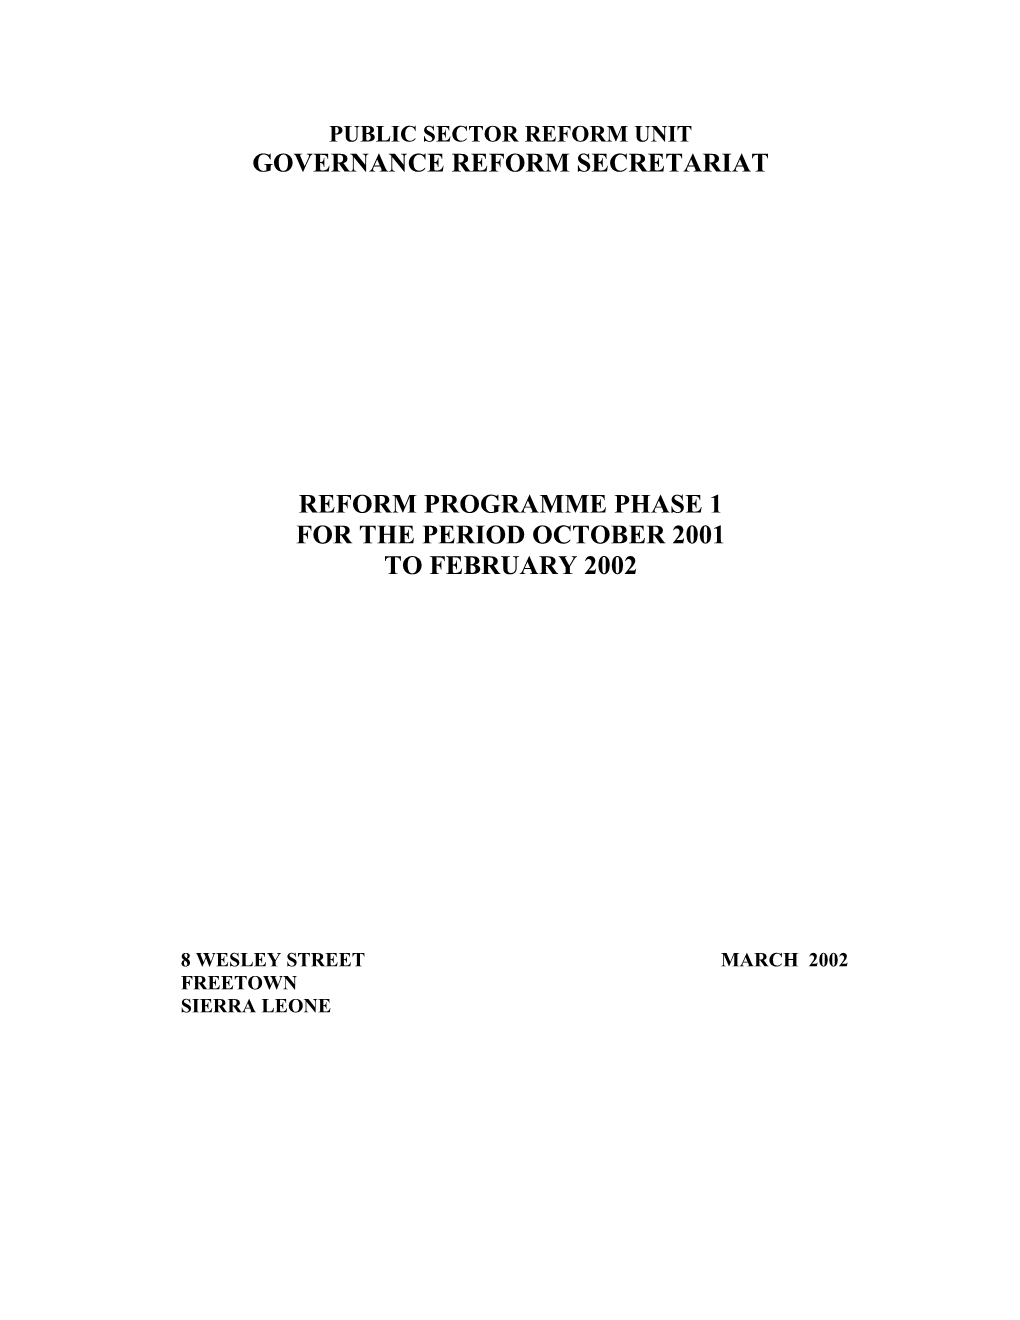 Report on the Public Service Reform Programme